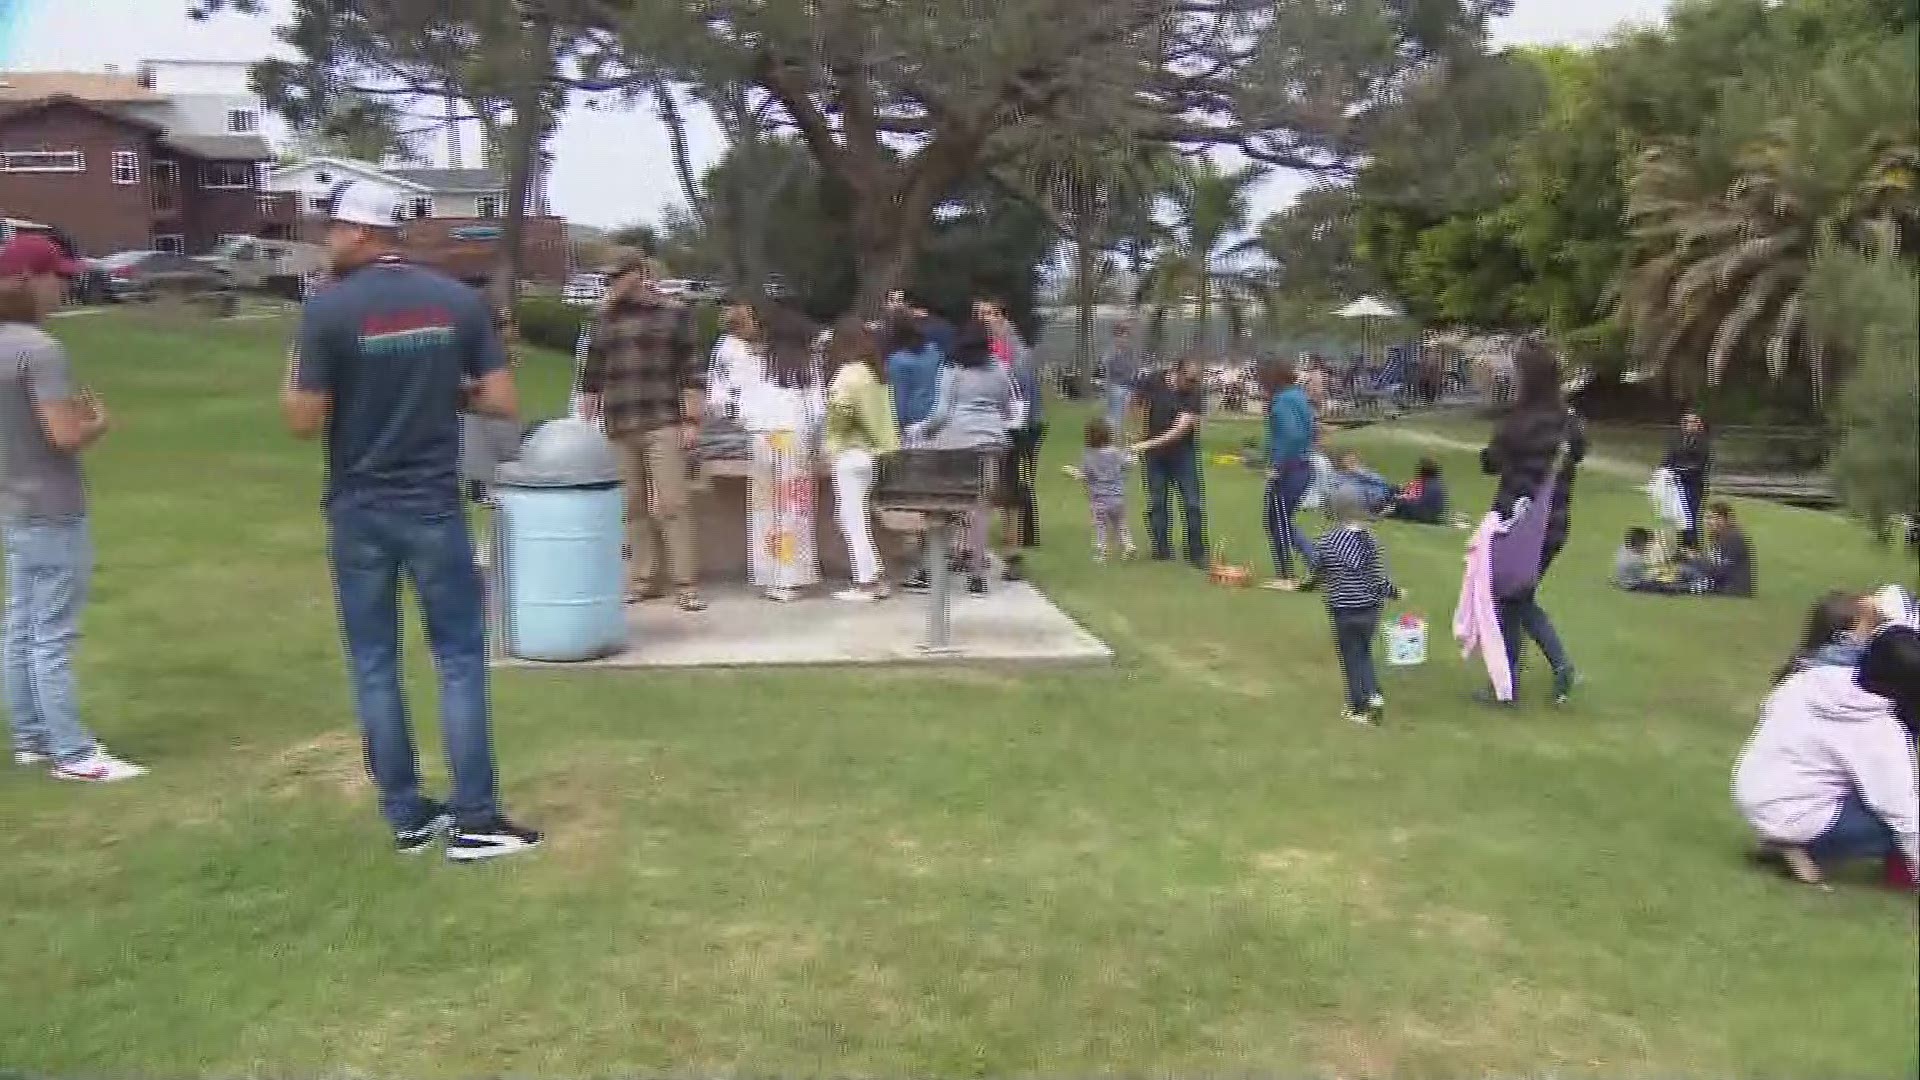 Swami’s Surfing Association and San Diego’s Office of Education set out over 3500 beeping eggs.